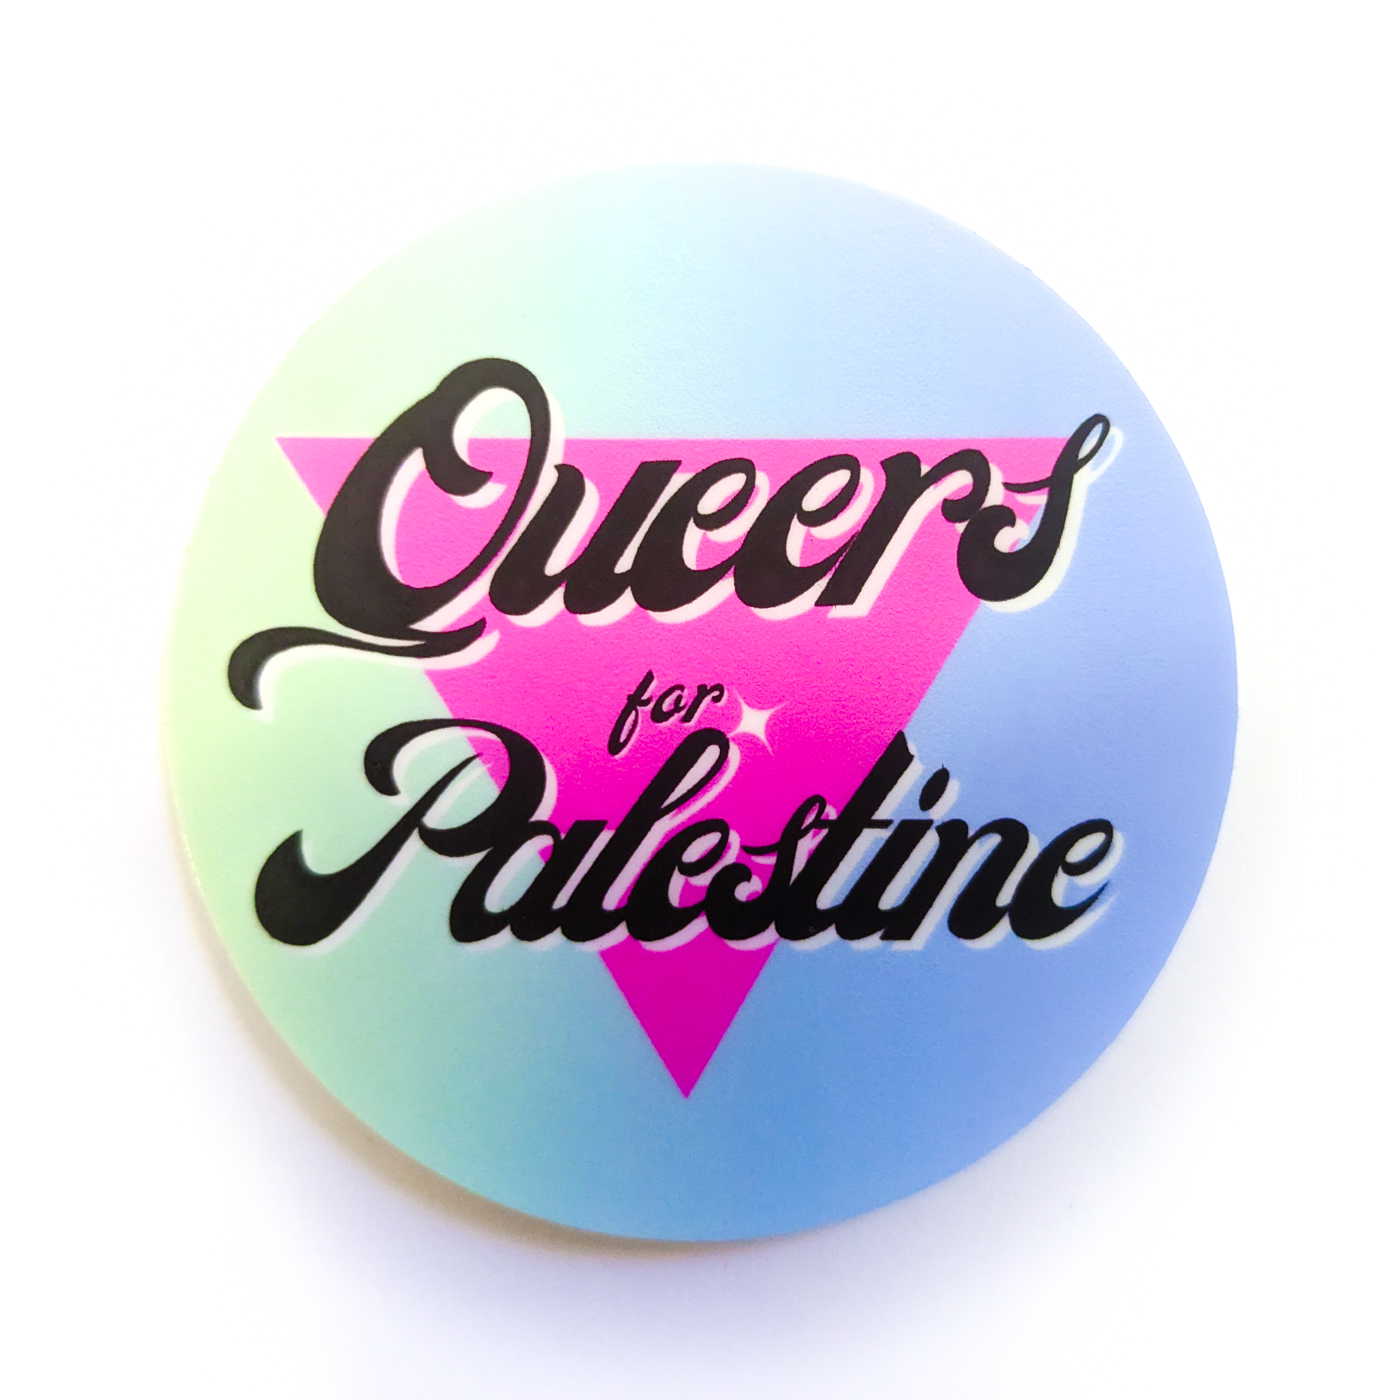 Queers for Palestine Sticker